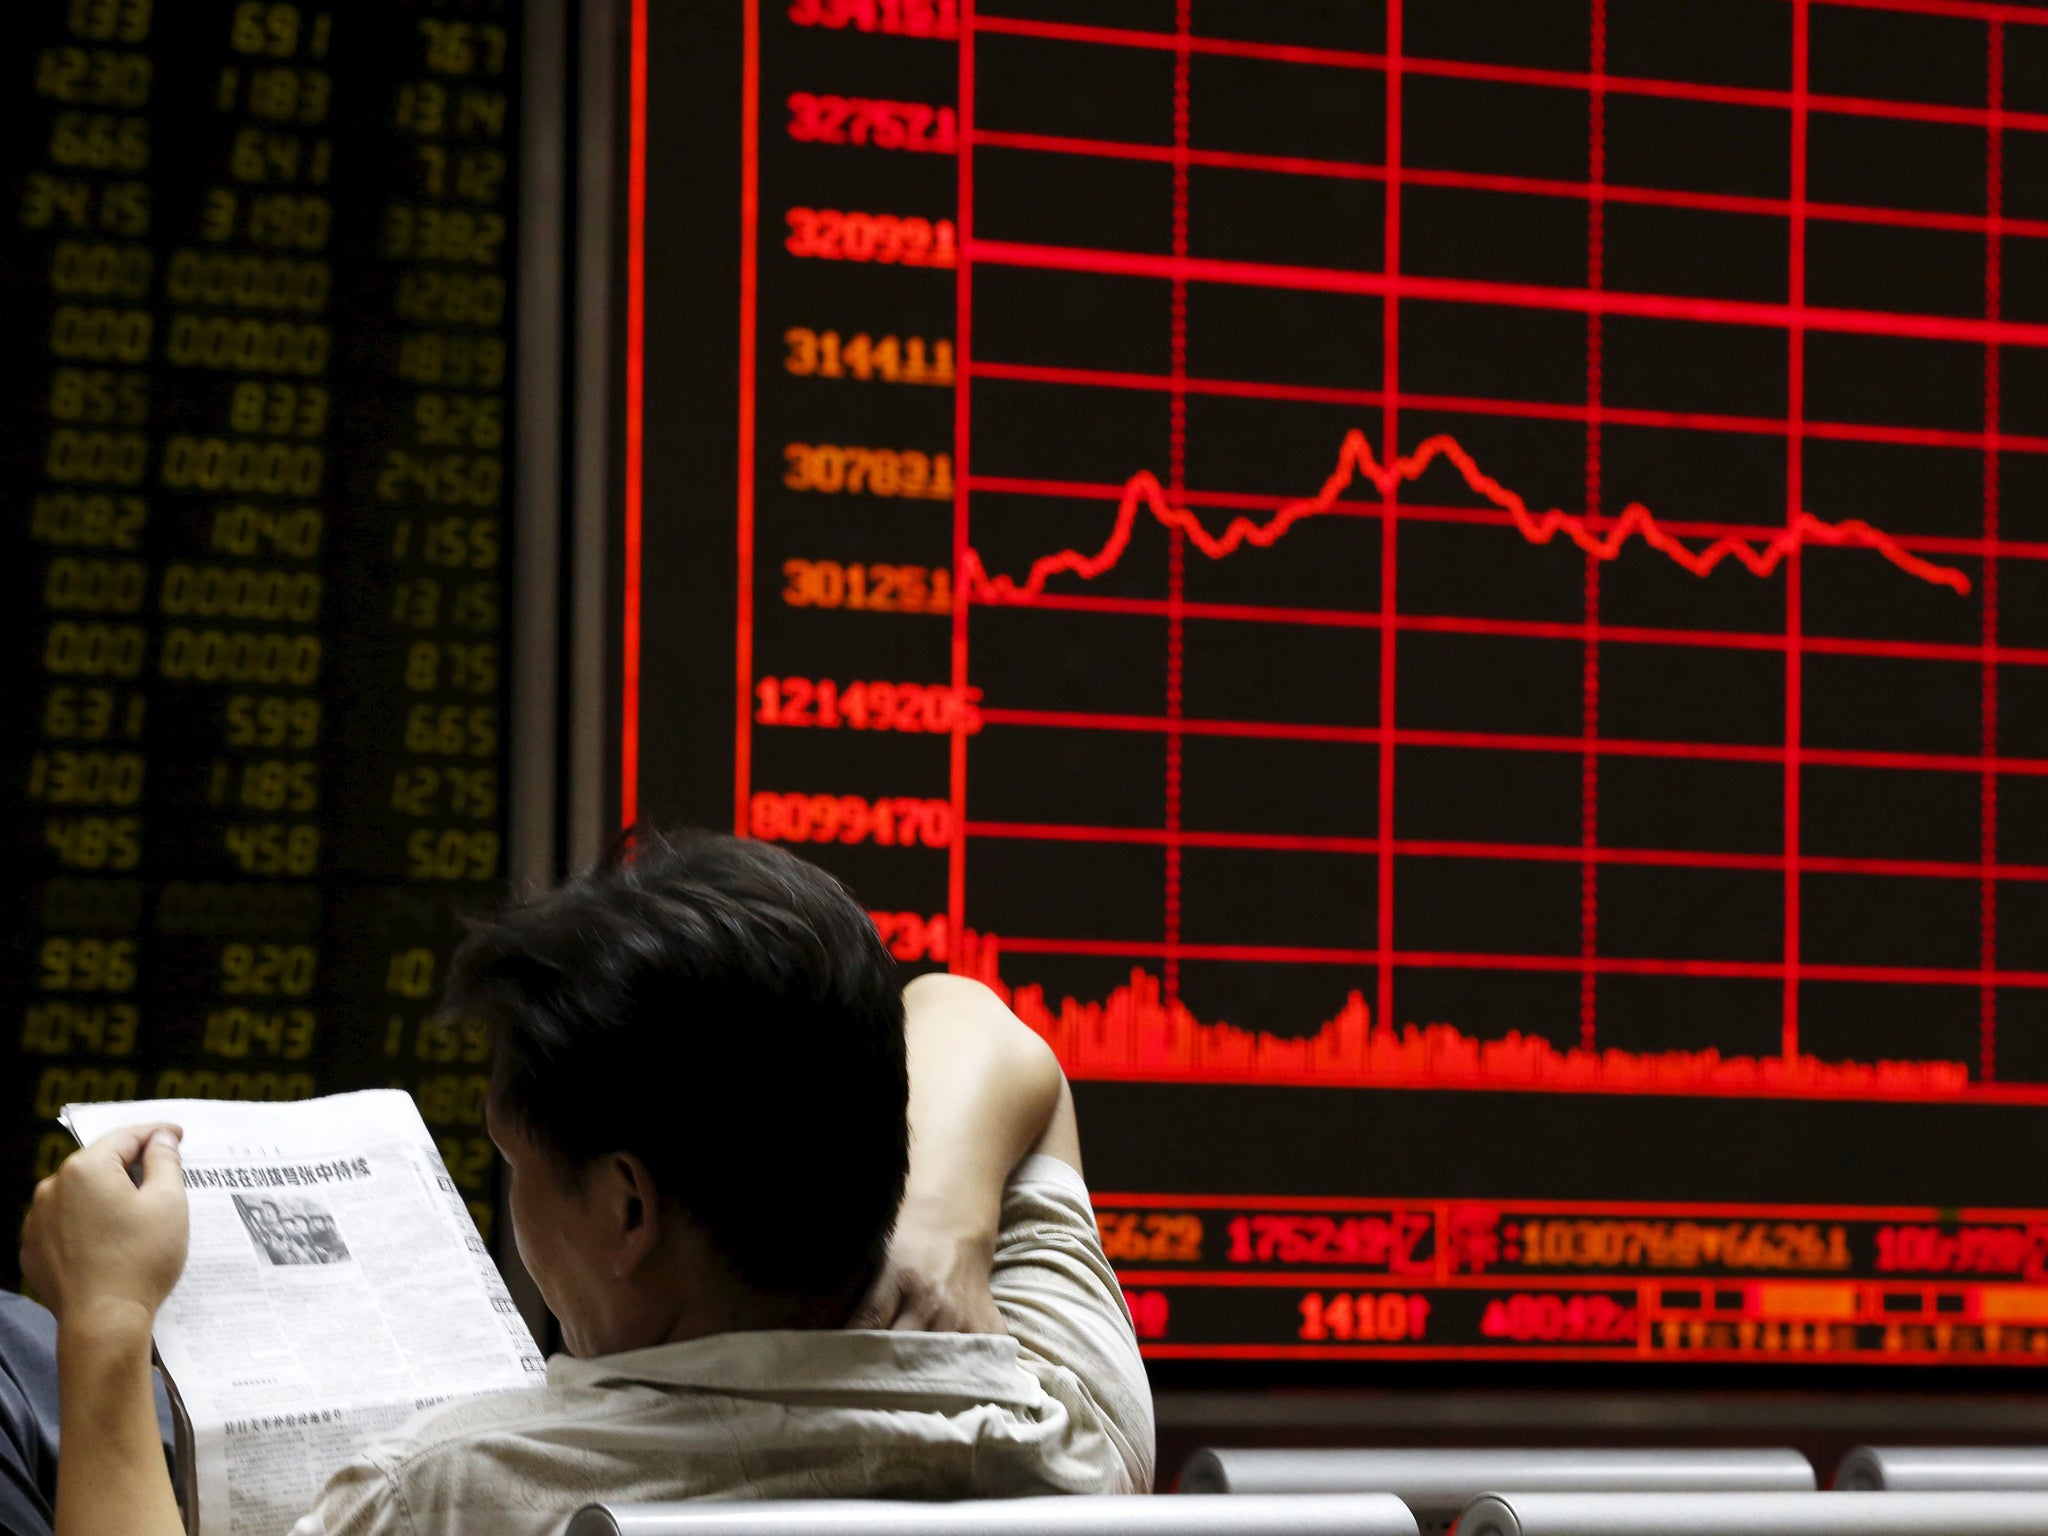 An investor reads a newspaper in front of an electronic board showing stock information at a brokerage house in Beijing, China. China's major stock indexes sank more than 6 percent in early trade on Tuesday, after a catastrophic Monday that saw Chinese e